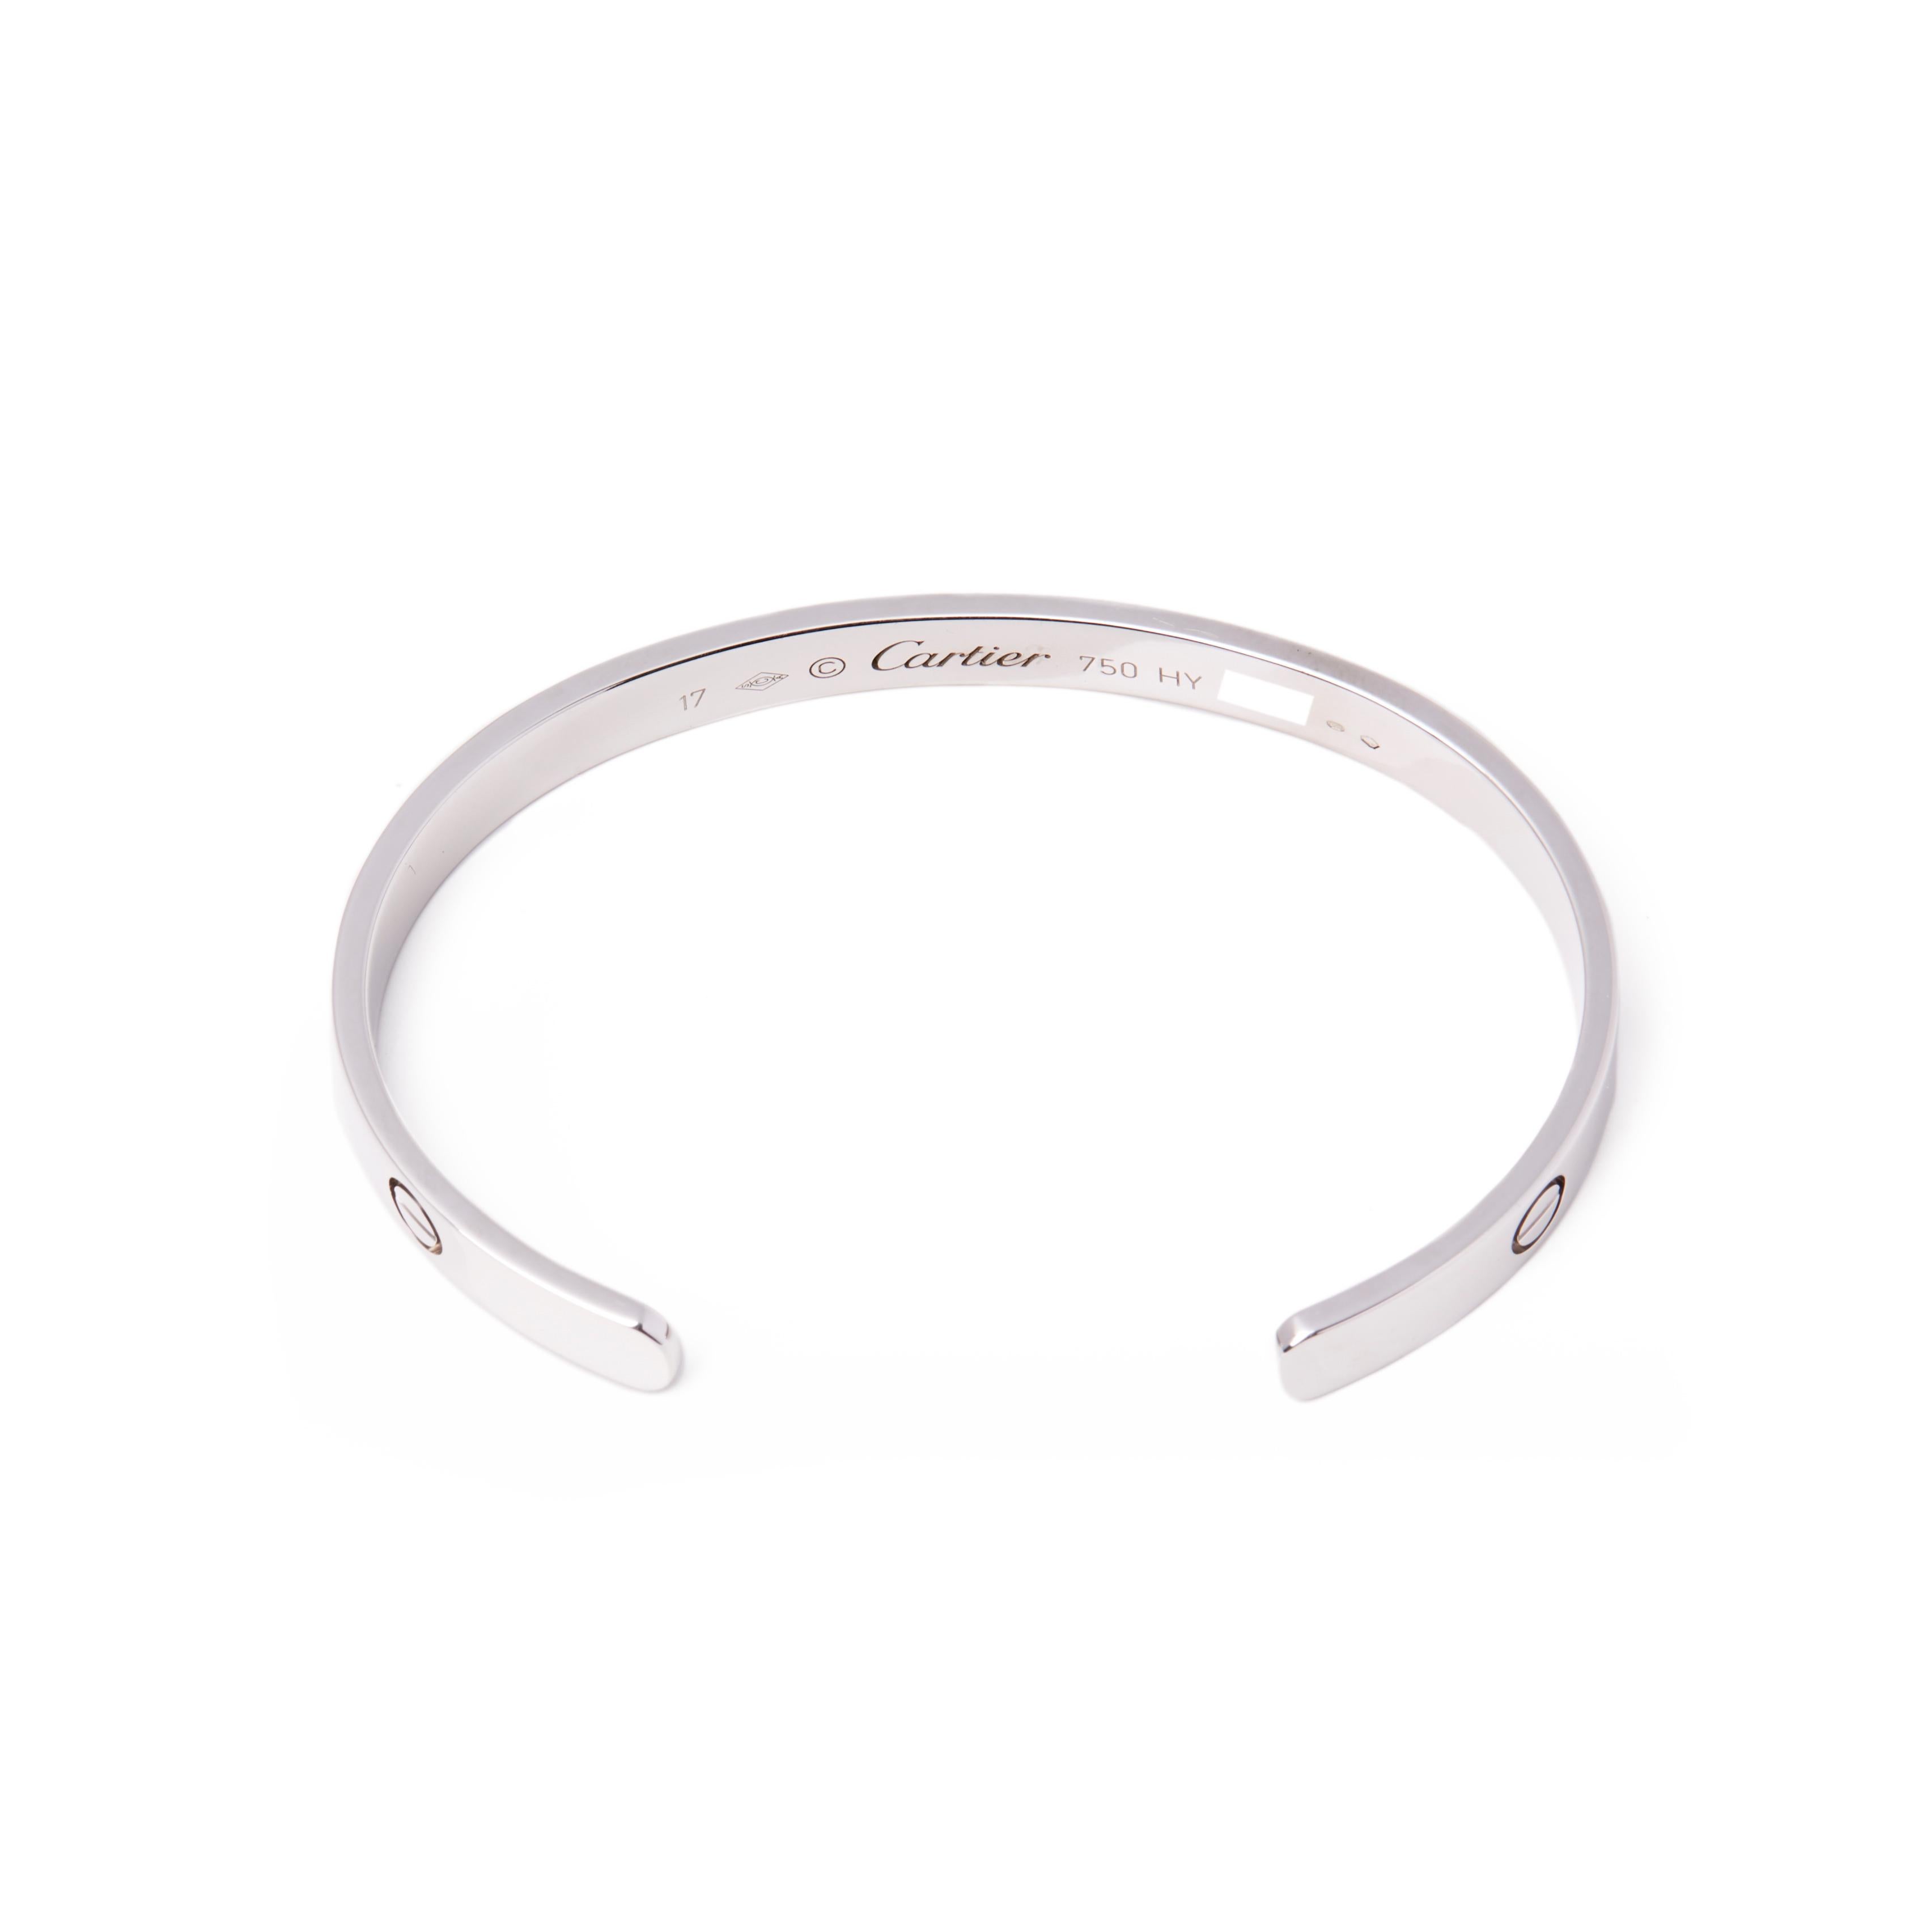 This cuff bangle from Cartier is from their Love collection and features their iconic screw detail set in 18ct white gold. Complete with Xupes presentation box. Our Xupes reference is COMJ490 should you need to quote this.